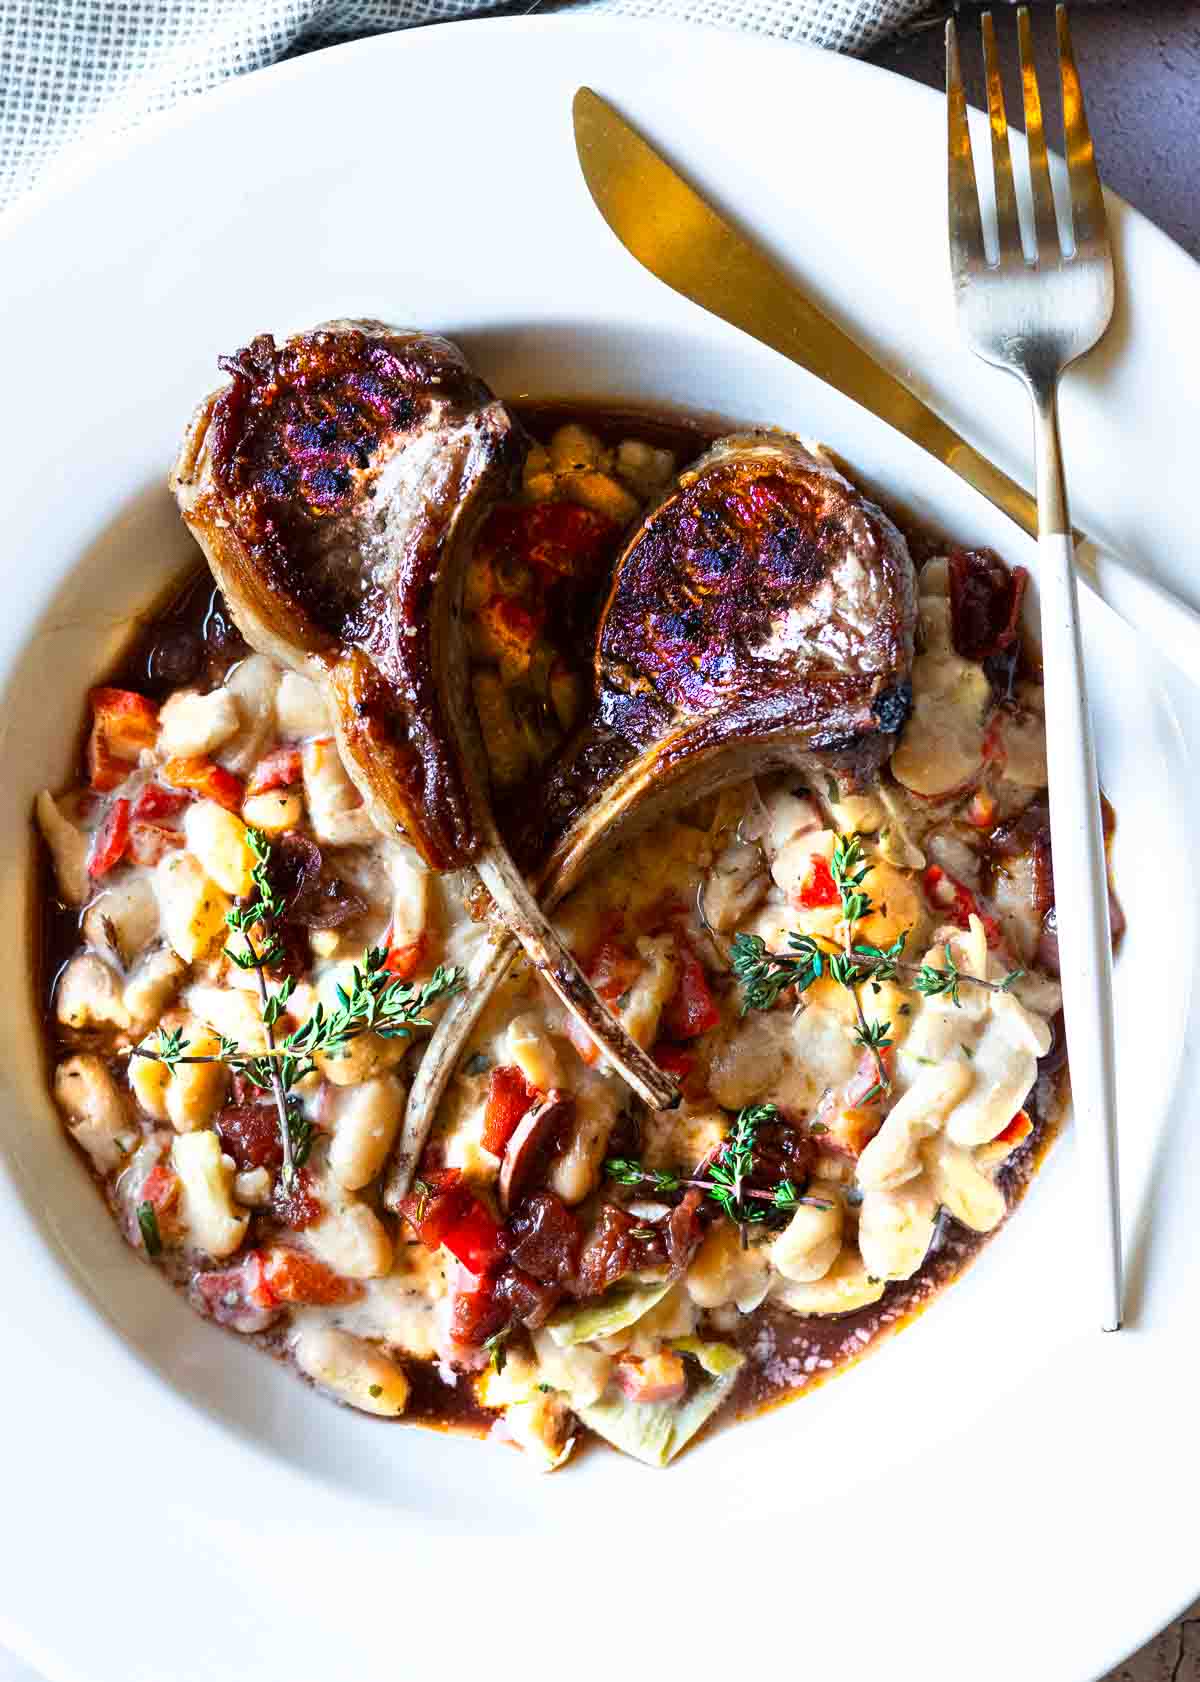 Lamb lollipops served over white beans drizzled with red wine reduction sauce.